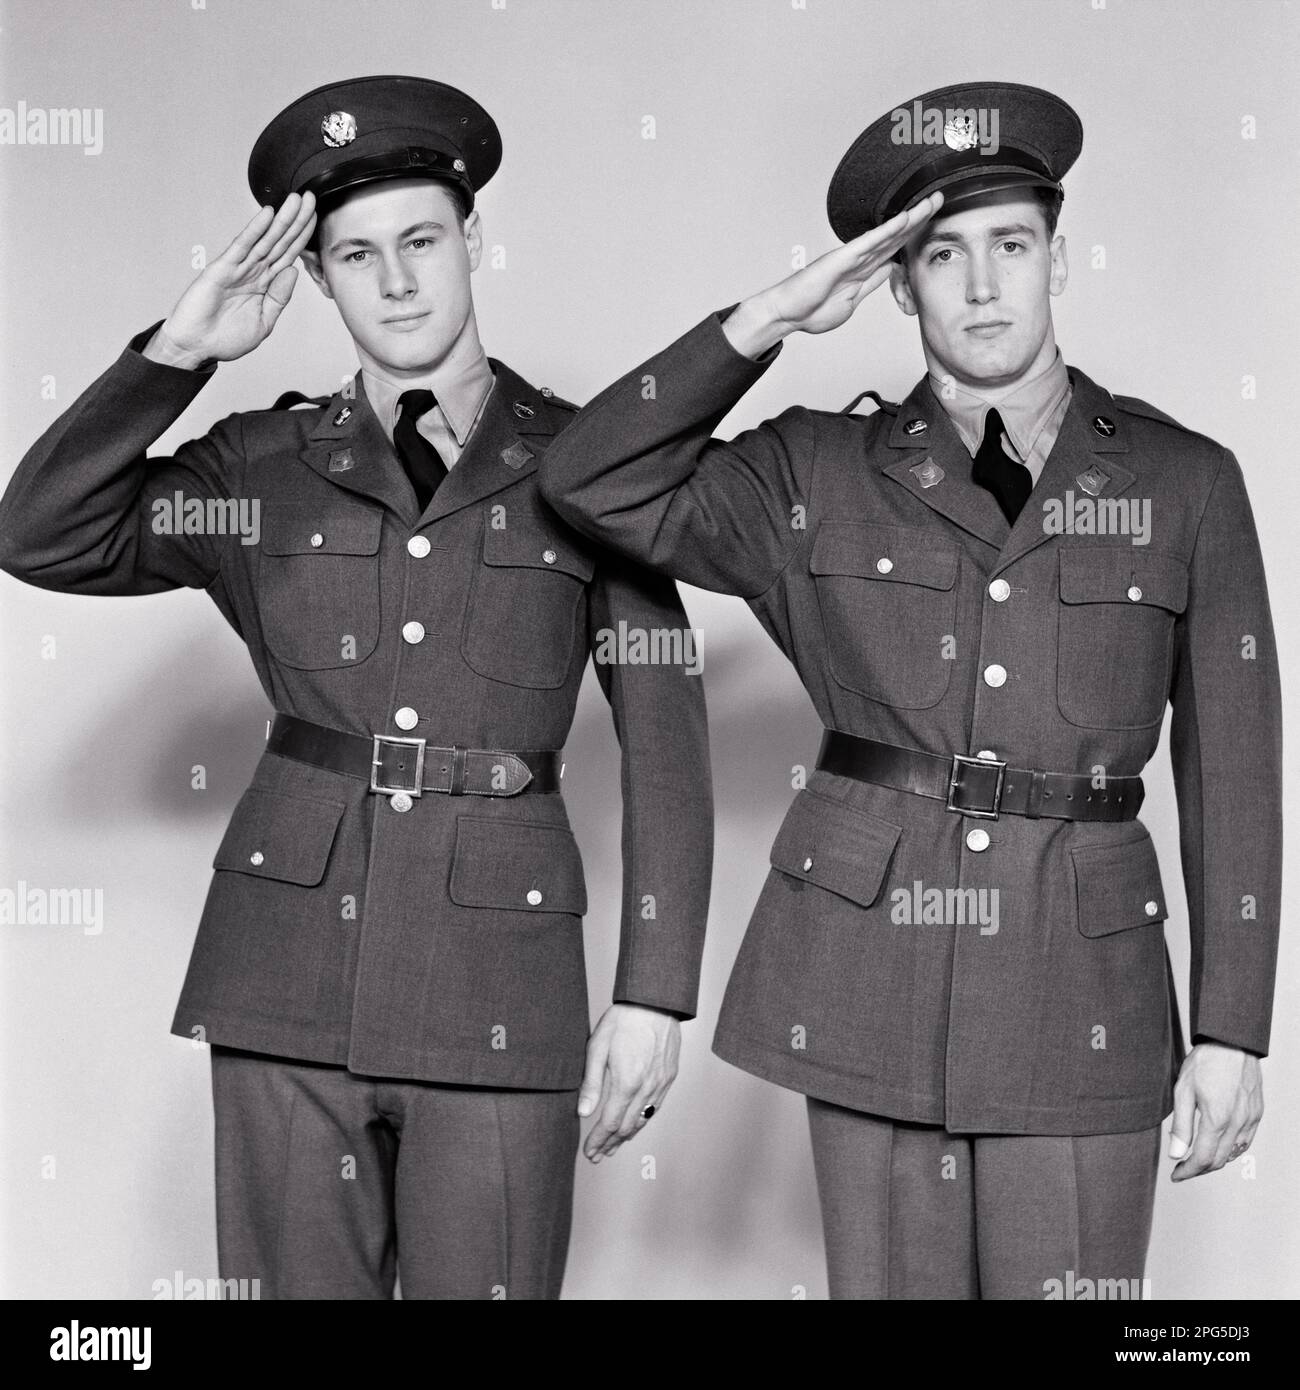 1940s TWO MEN IN ARMY UNIFORMS LOOKING AT CAMERA SALUTING JUST ENLISTED AT THE BEGINNING OF WORLD WAR 2 - m1324 HAR001 HARS B&W EYE CONTACT FREEDOM ADVENTURE SALUTE COURAGE LEADERSHIP PRIDE OPPORTUNITY OCCUPATIONS POLITICS SIBLING UNIFORMS SUPPORT COOPERATION MID-ADULT MID-ADULT MAN SALUTING TOGETHERNESS YOUNG ADULT MAN BEGINNING BLACK AND WHITE CAUCASIAN ETHNICITY ENLISTED HAR001 OLD FASHIONED Stock Photo